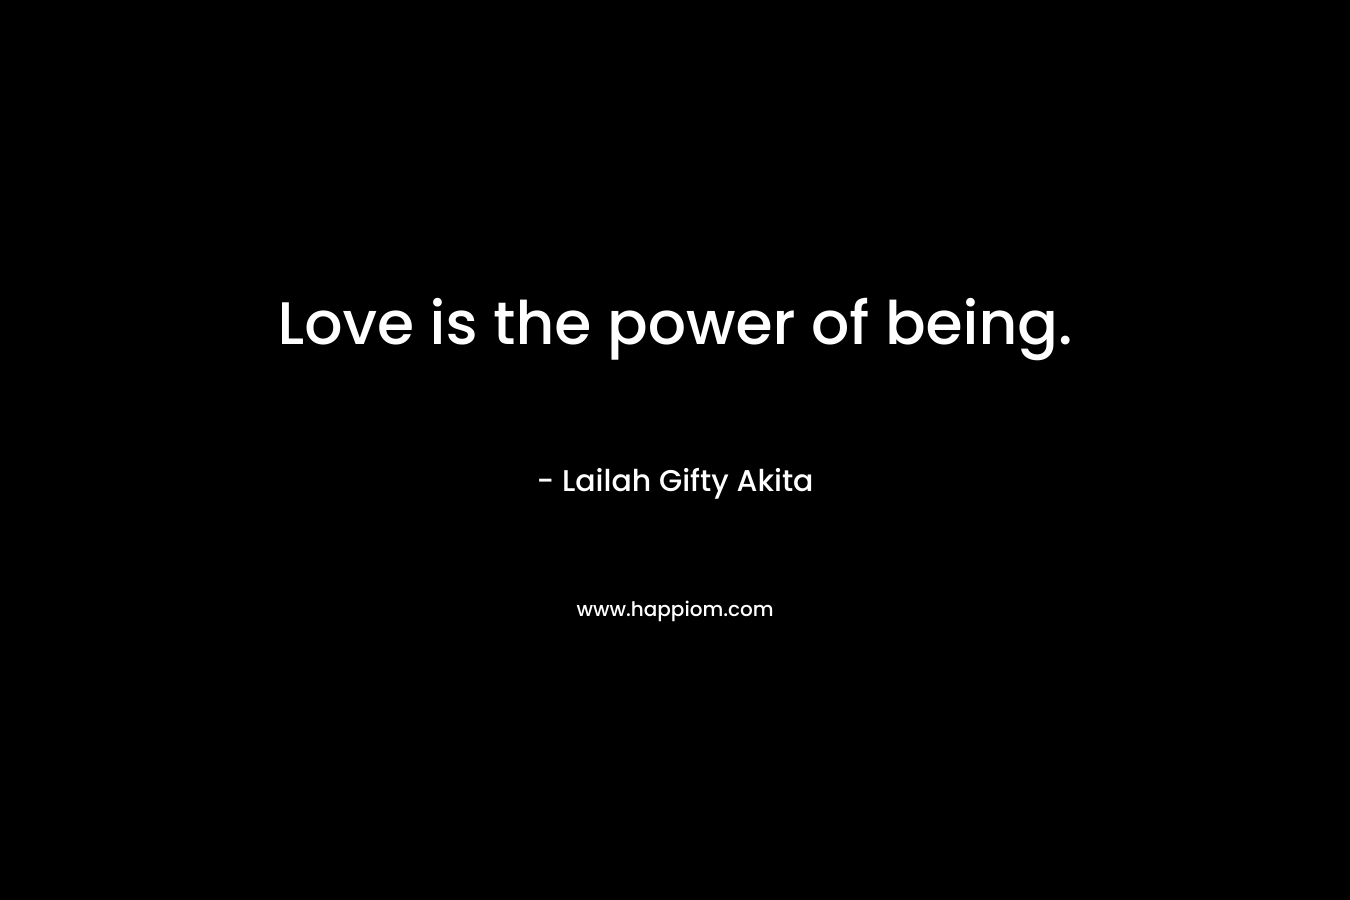 Love is the power of being.